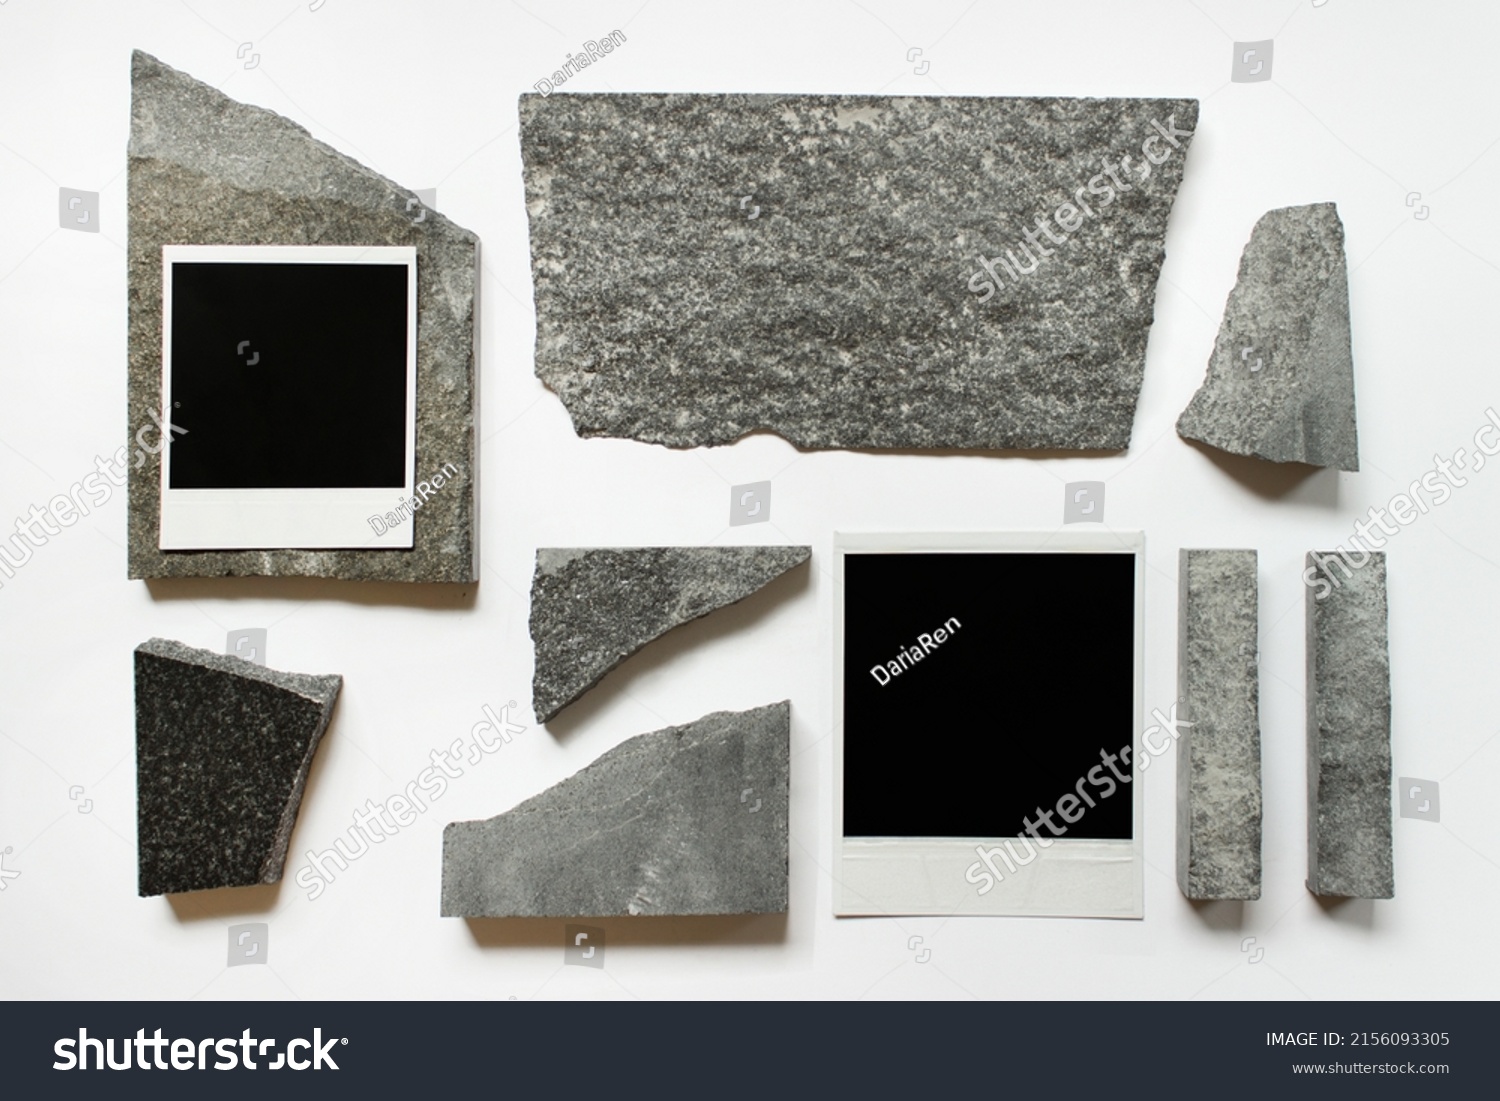 Abstract composition with two polaroid cards and random sized stones on white background. #2156093305